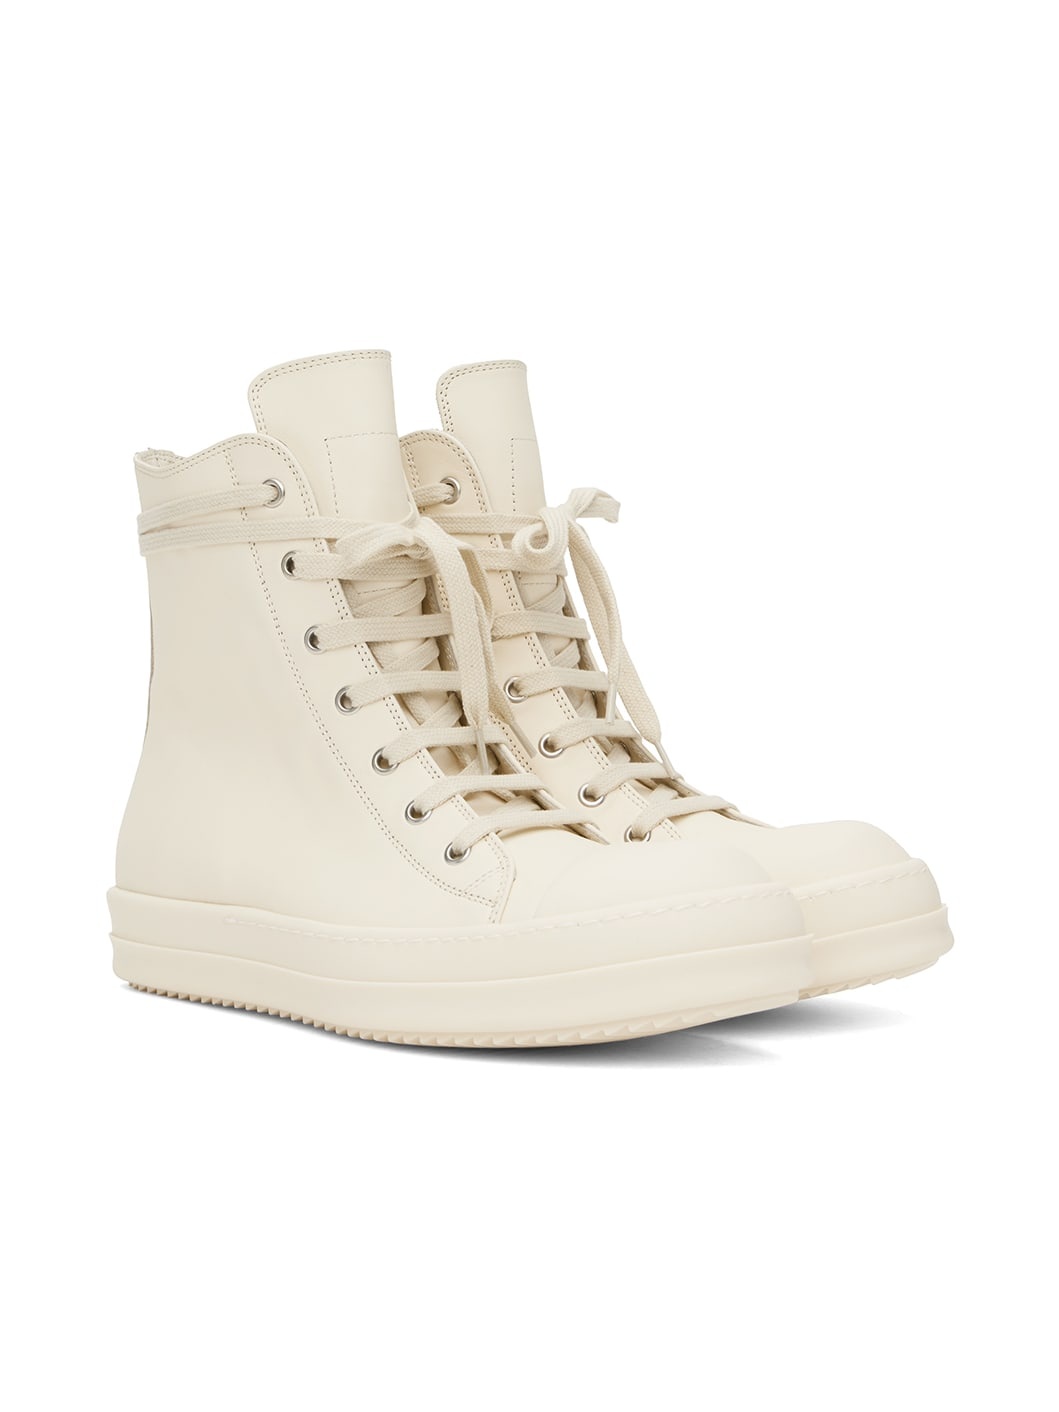 Off-White High Sneakers - 4